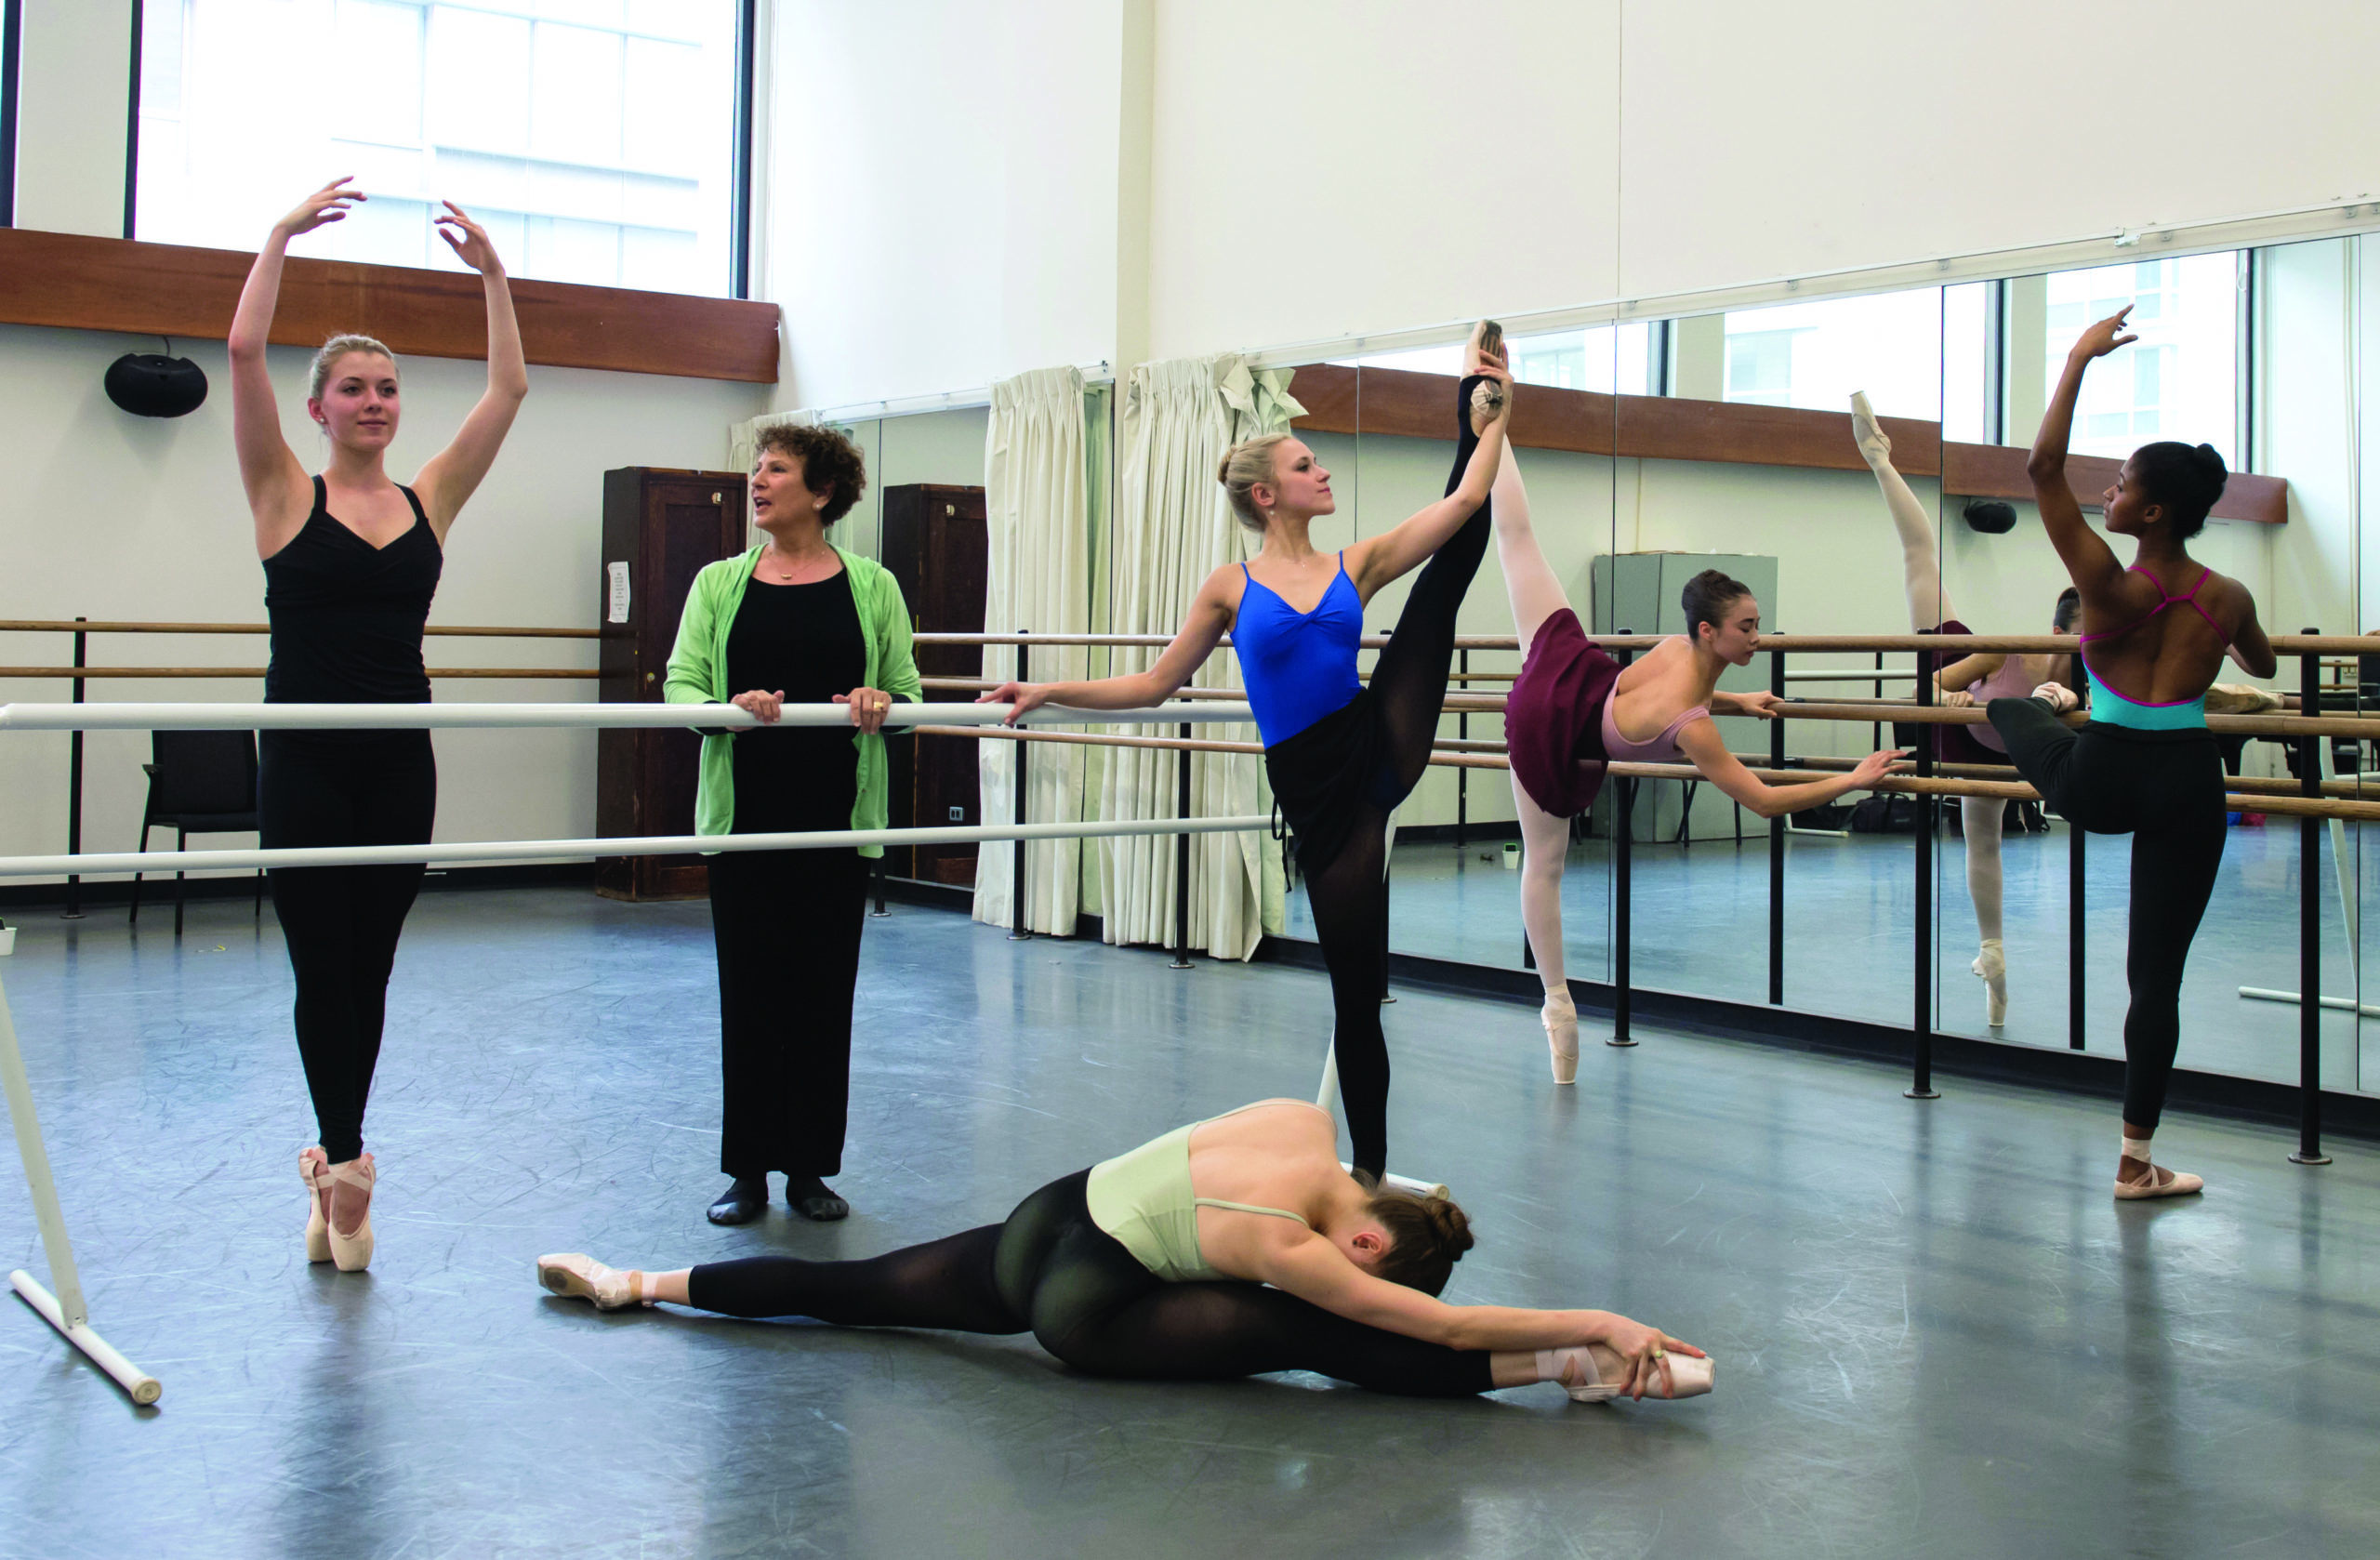 Group of dancers stretching around the barre with a dance educator Charla Genn in the middle